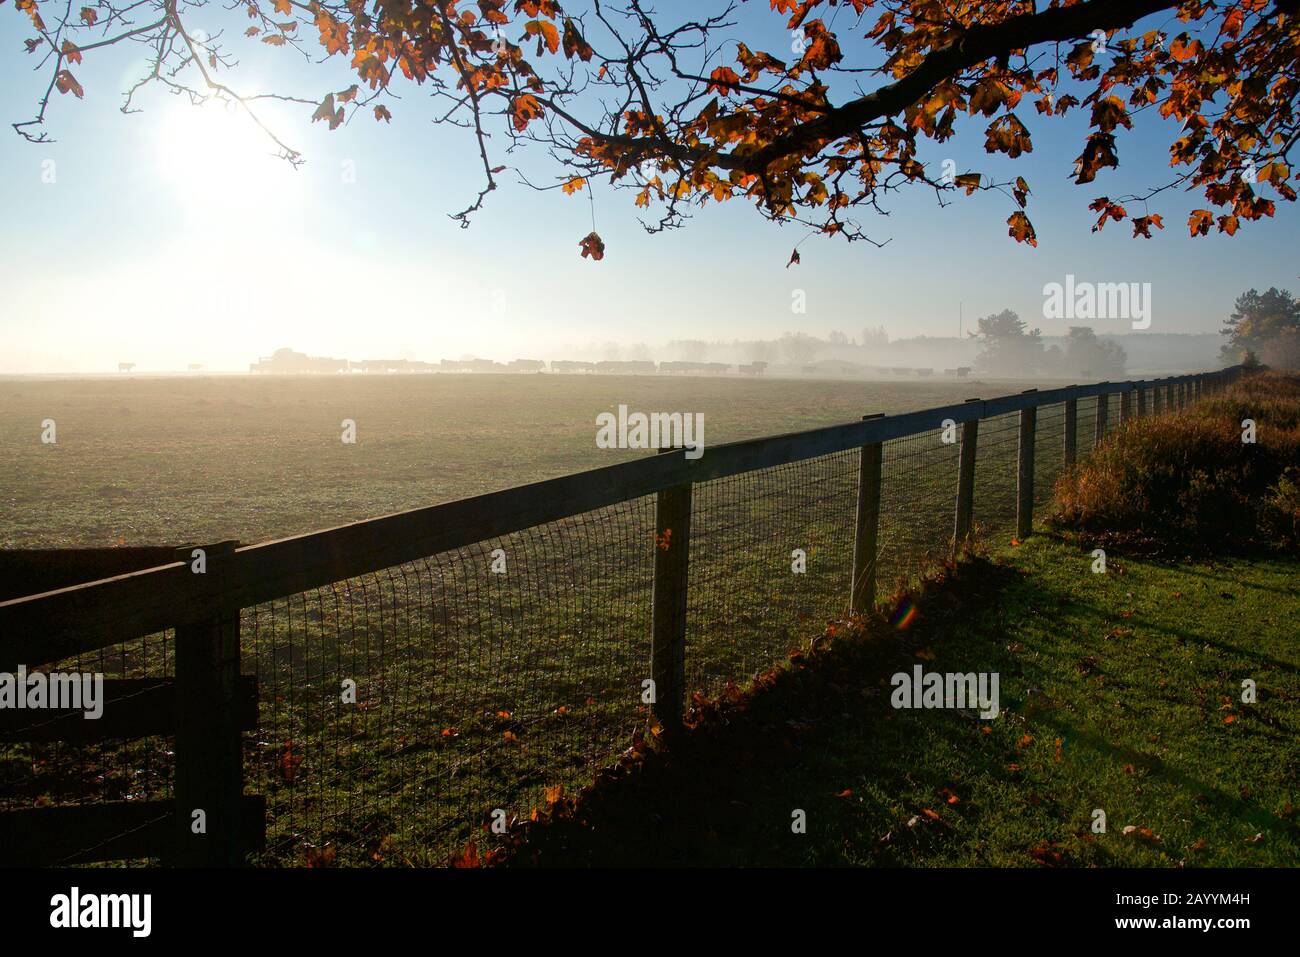 cattle ranch with fences in foreground Stock Photo